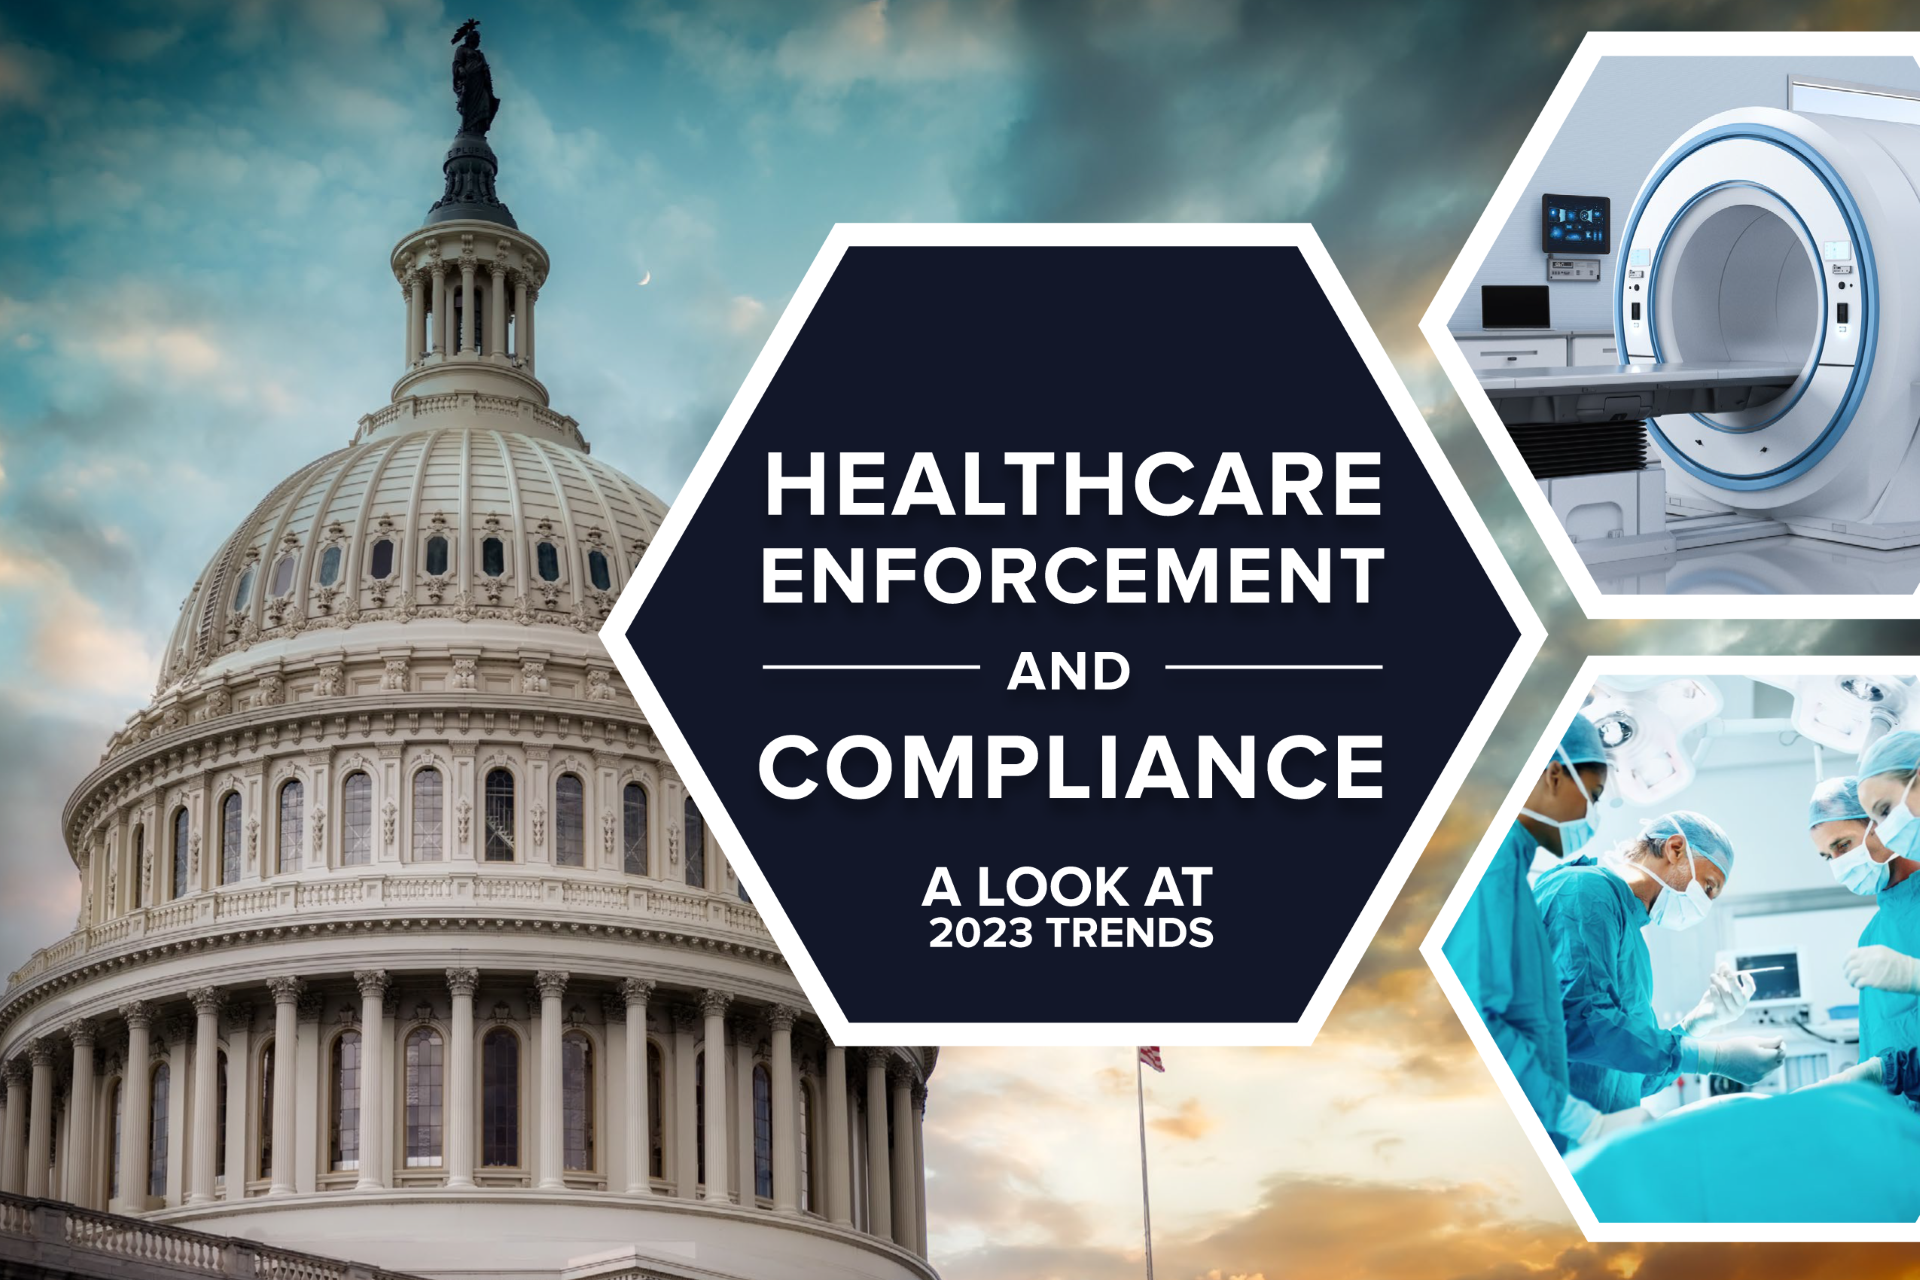 Healthcare Enforcement and Compliance: A Look at 2023 Trends